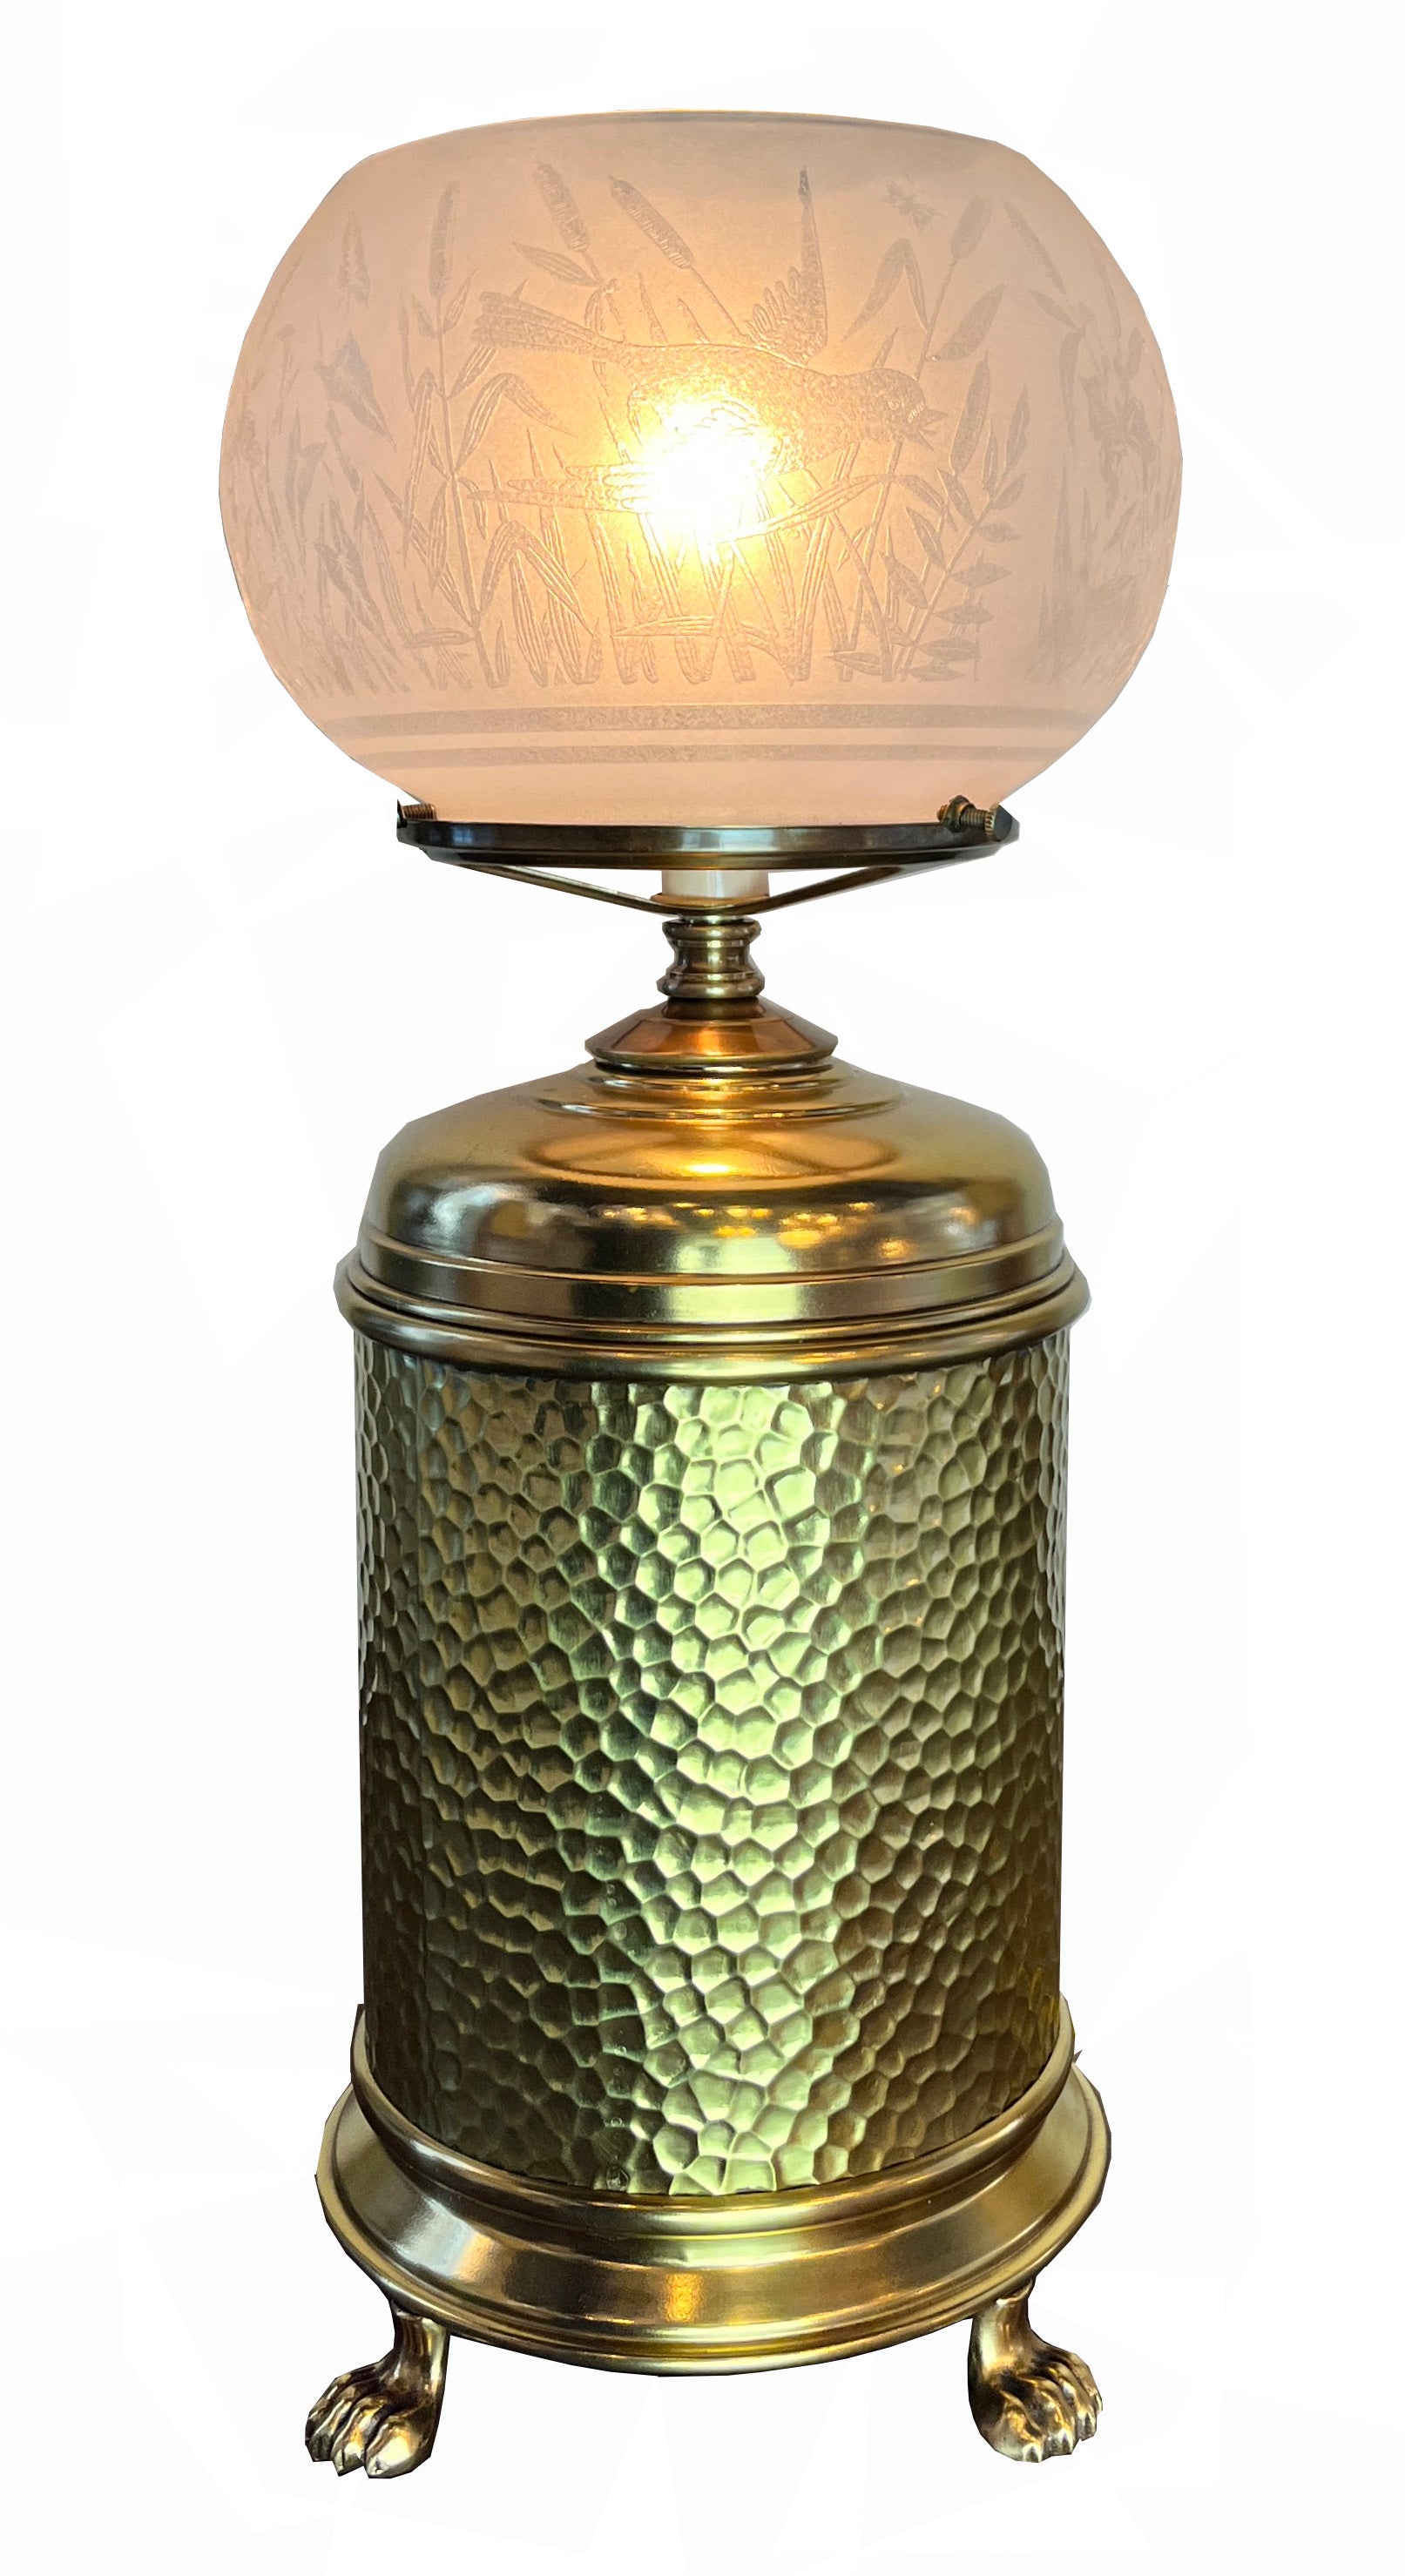 Antique 1880s Hammered Aesthetic Movement Table Lamp with Claw Foot Base and Orignal 5" Fishbowl Sparrow Shade